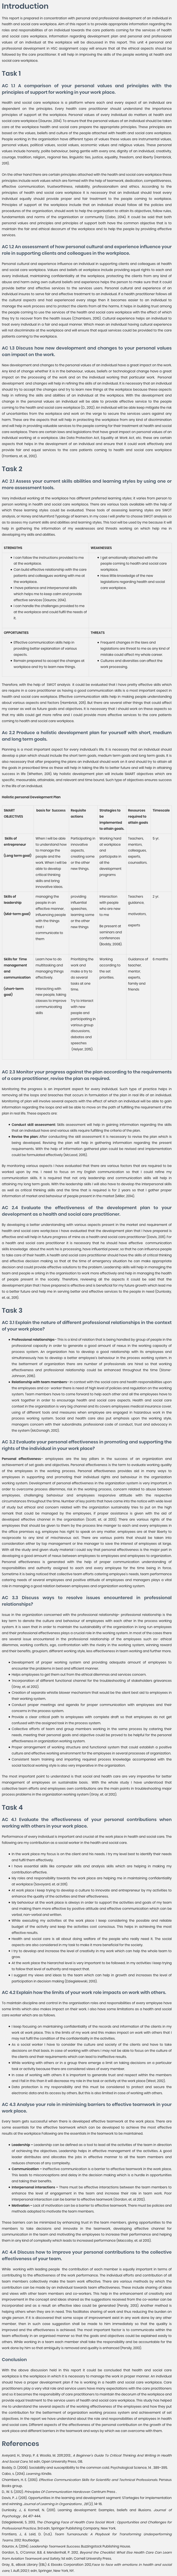 Unit 4 Personal and Professional Development in HSC